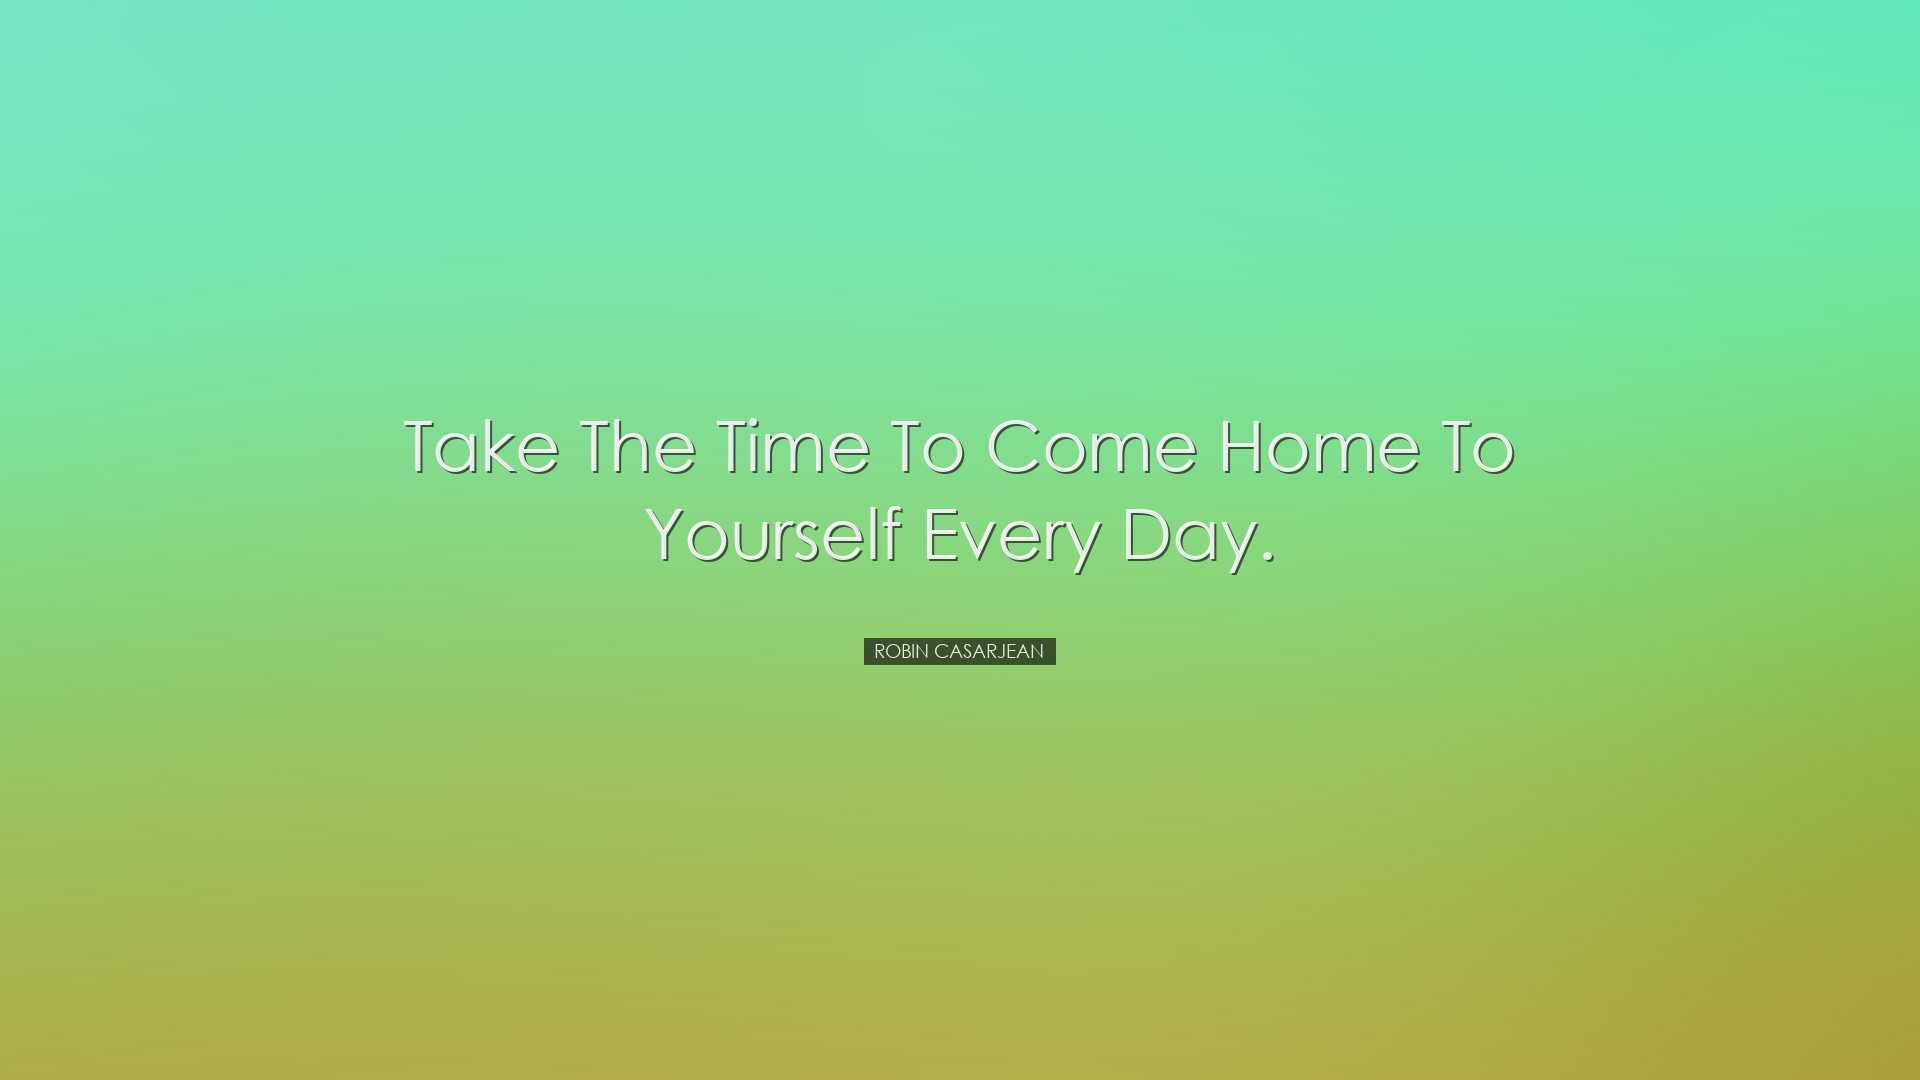 Take the time to come home to yourself every day. - Robin Casarjea